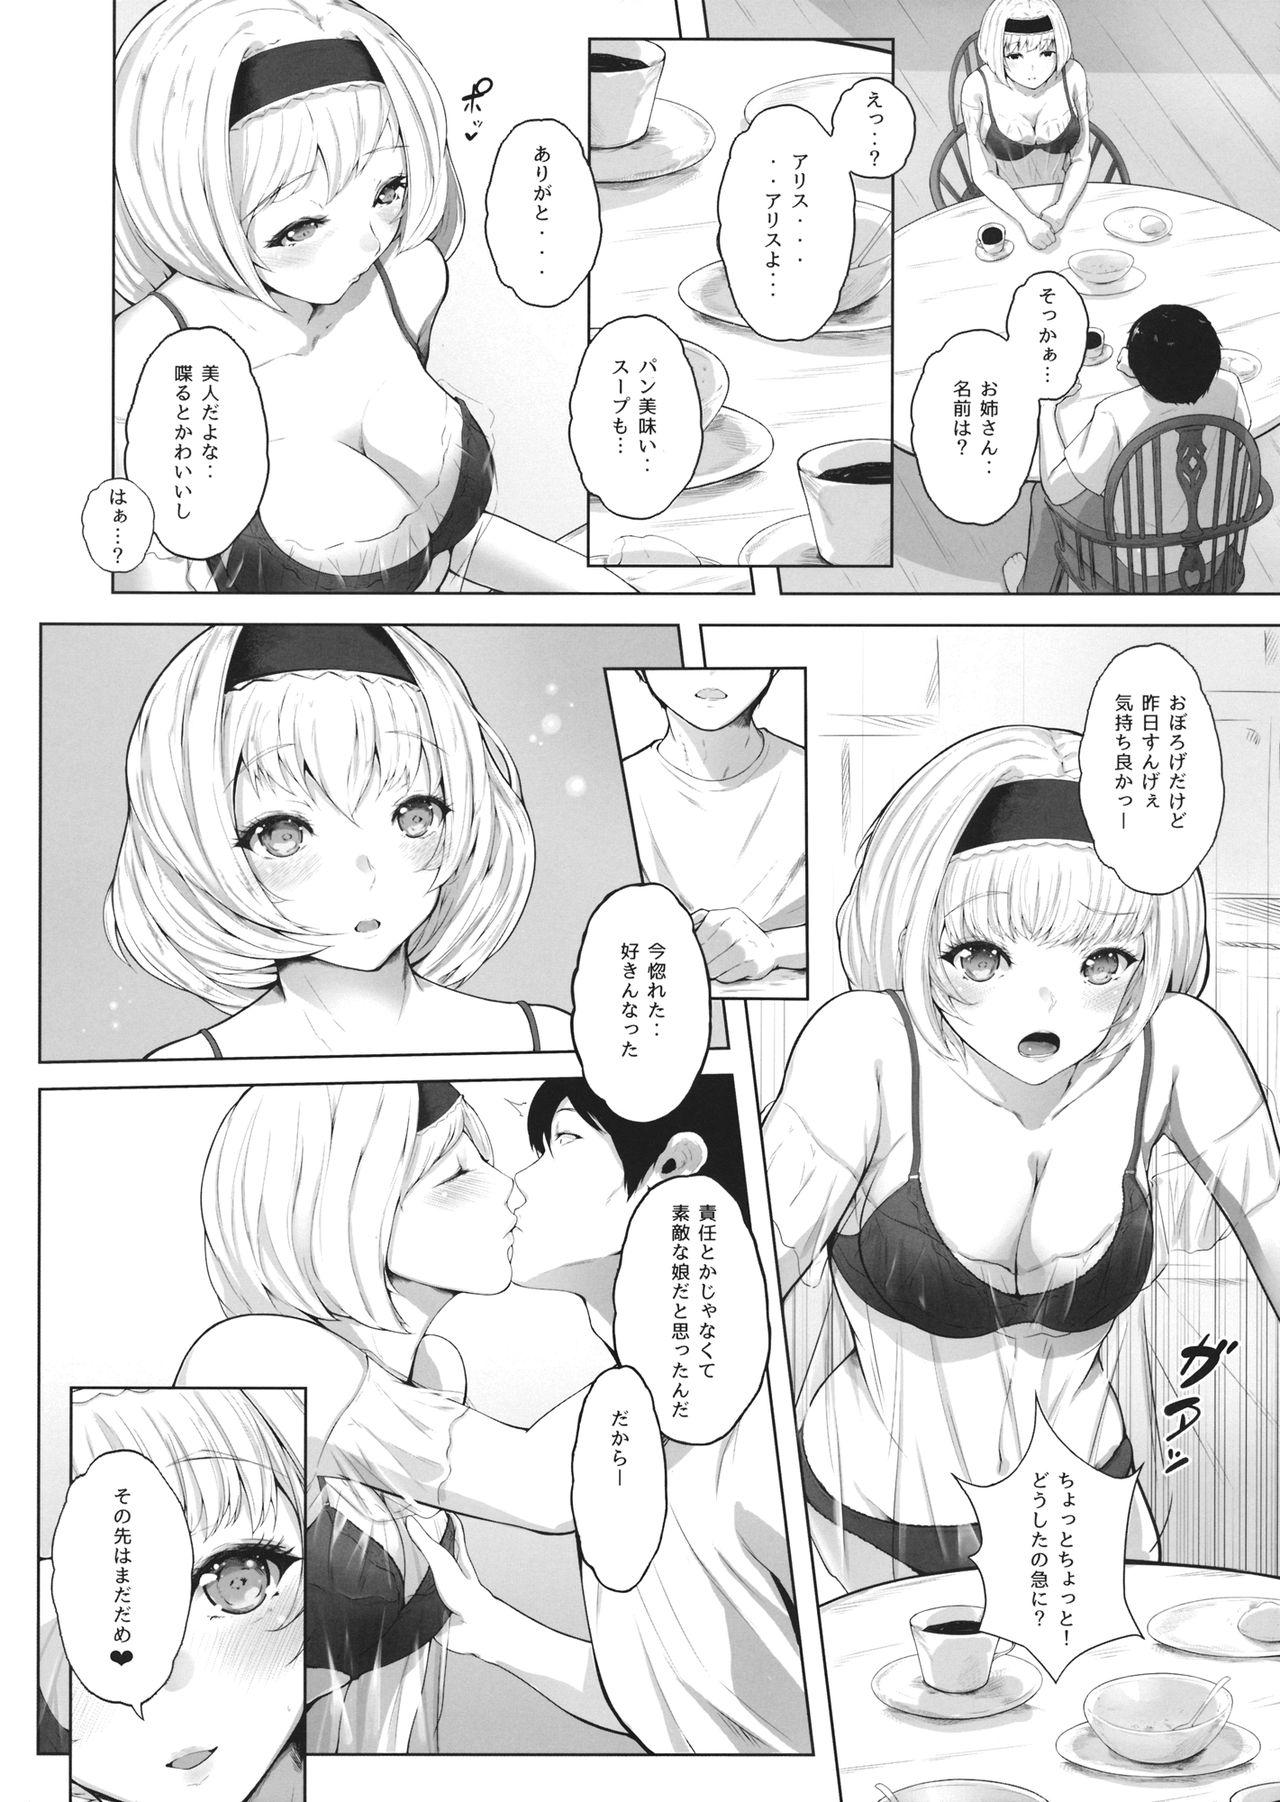 Students Sweet days - Touhou project Gros Seins - Page 11